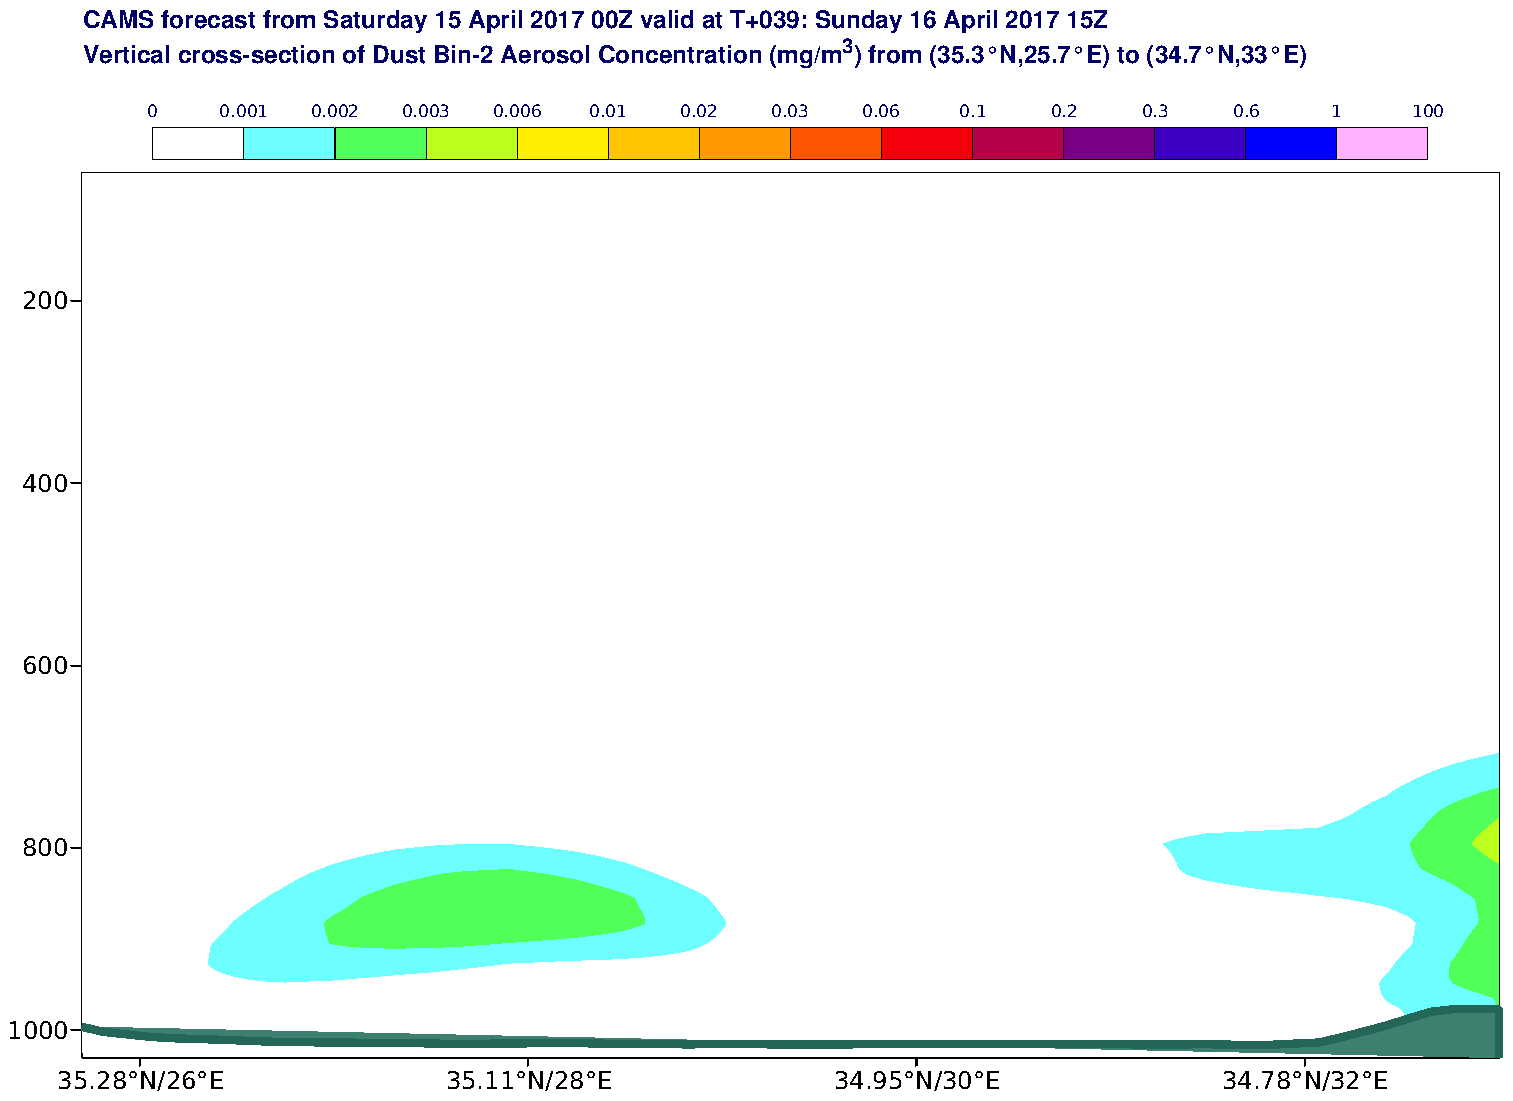 Vertical cross-section of Dust Bin-2 Aerosol Concentration (mg/m3) valid at T39 - 2017-04-16 15:00